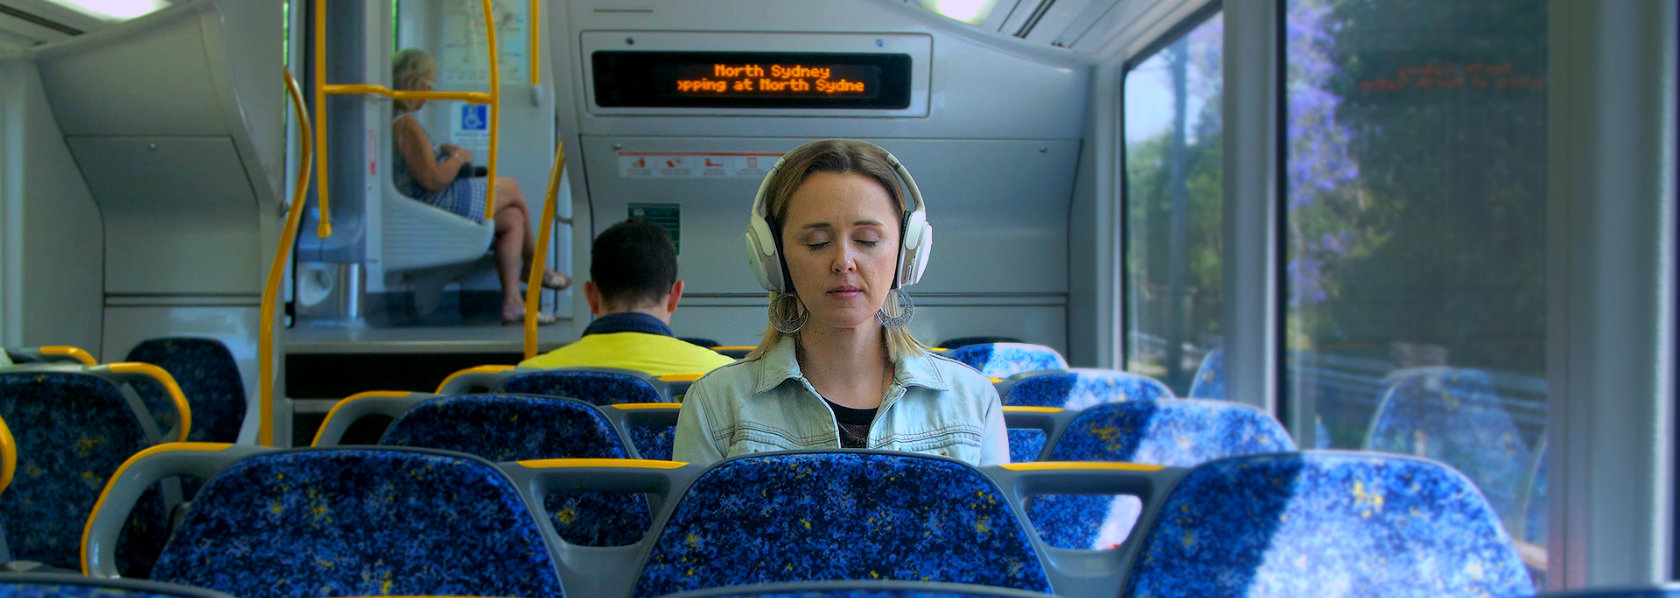 Lady wearing headphones in a train - My Year of Living Mindfully - THIS Buddhist Film Festival